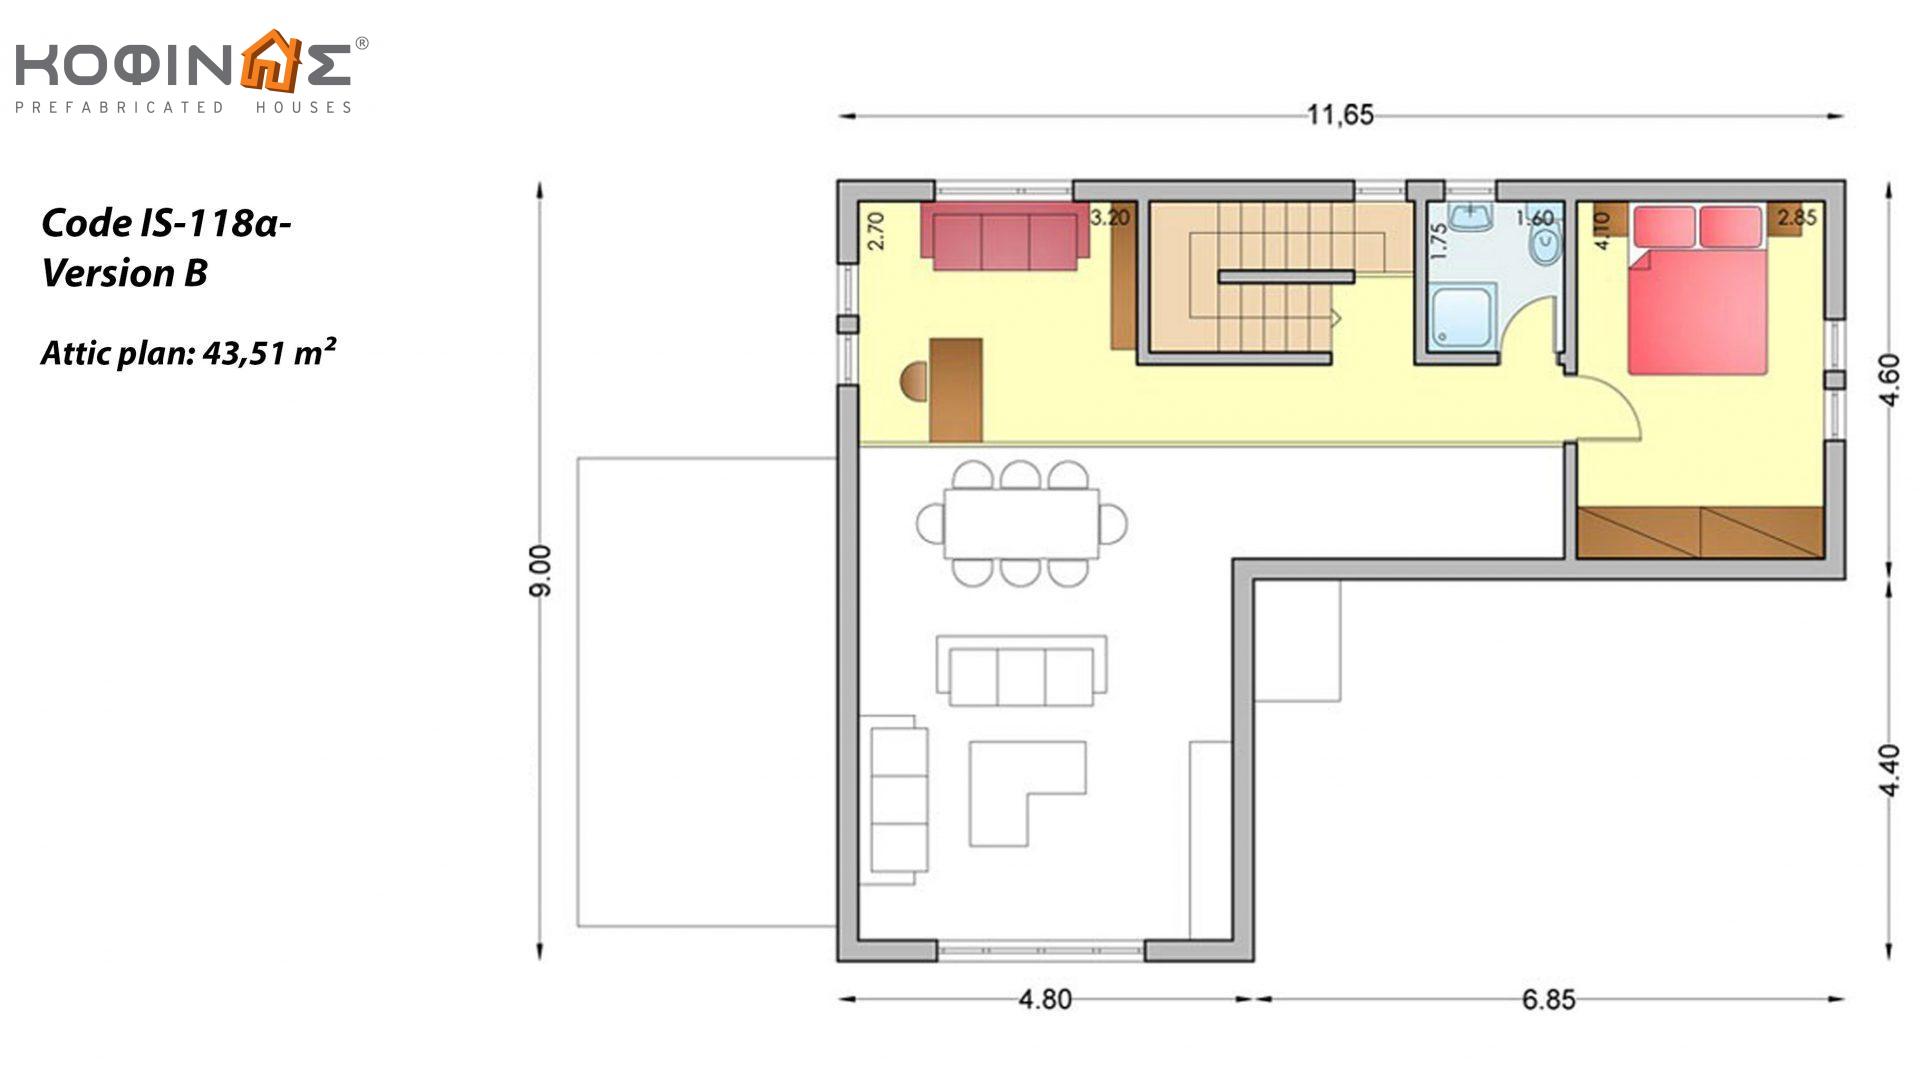 1-story house with attic IS-118a, total surface of 118,22 m² ,covered roofed areas 18,25 m²